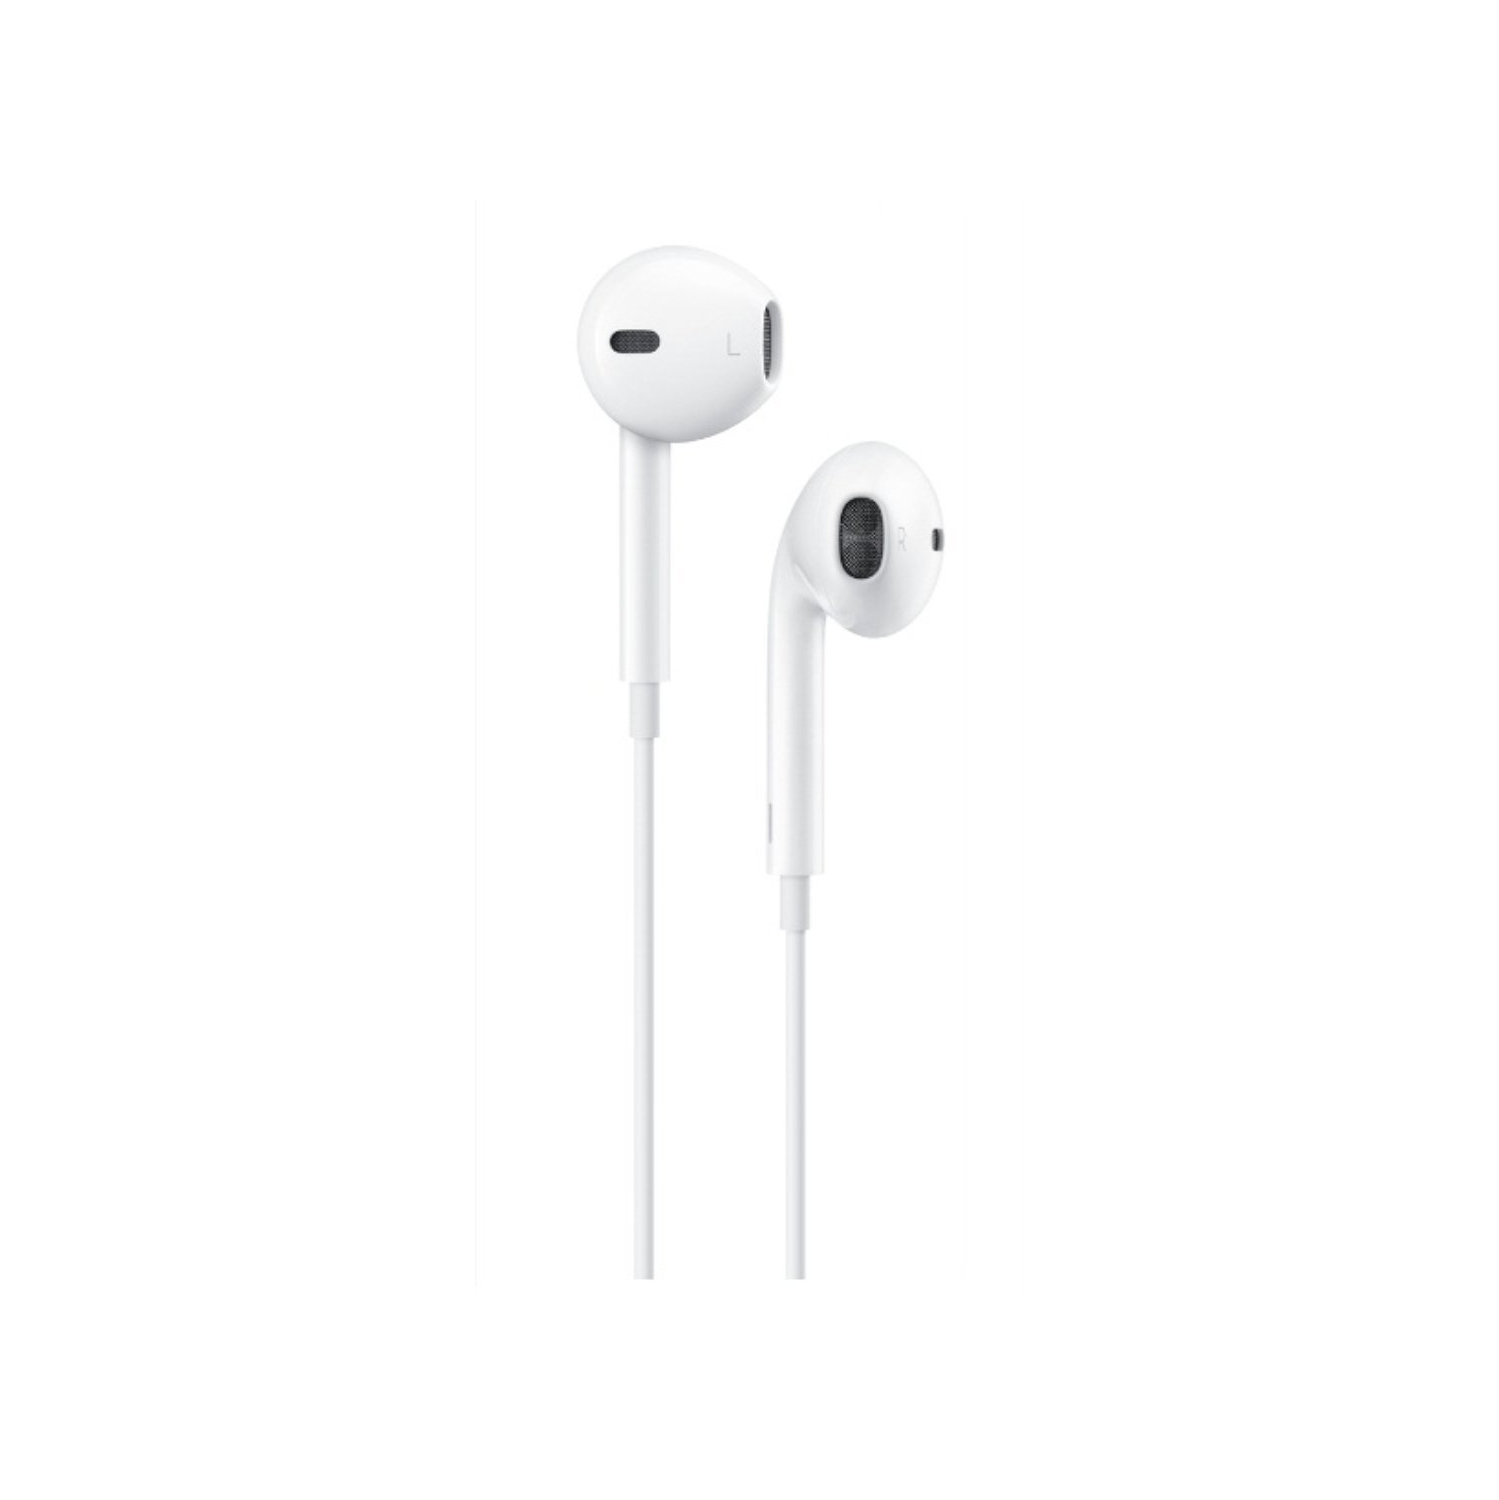 Apple Original Earpods Earphones Headphones With Remote And Mic Md7ll A White Best Buy Canada